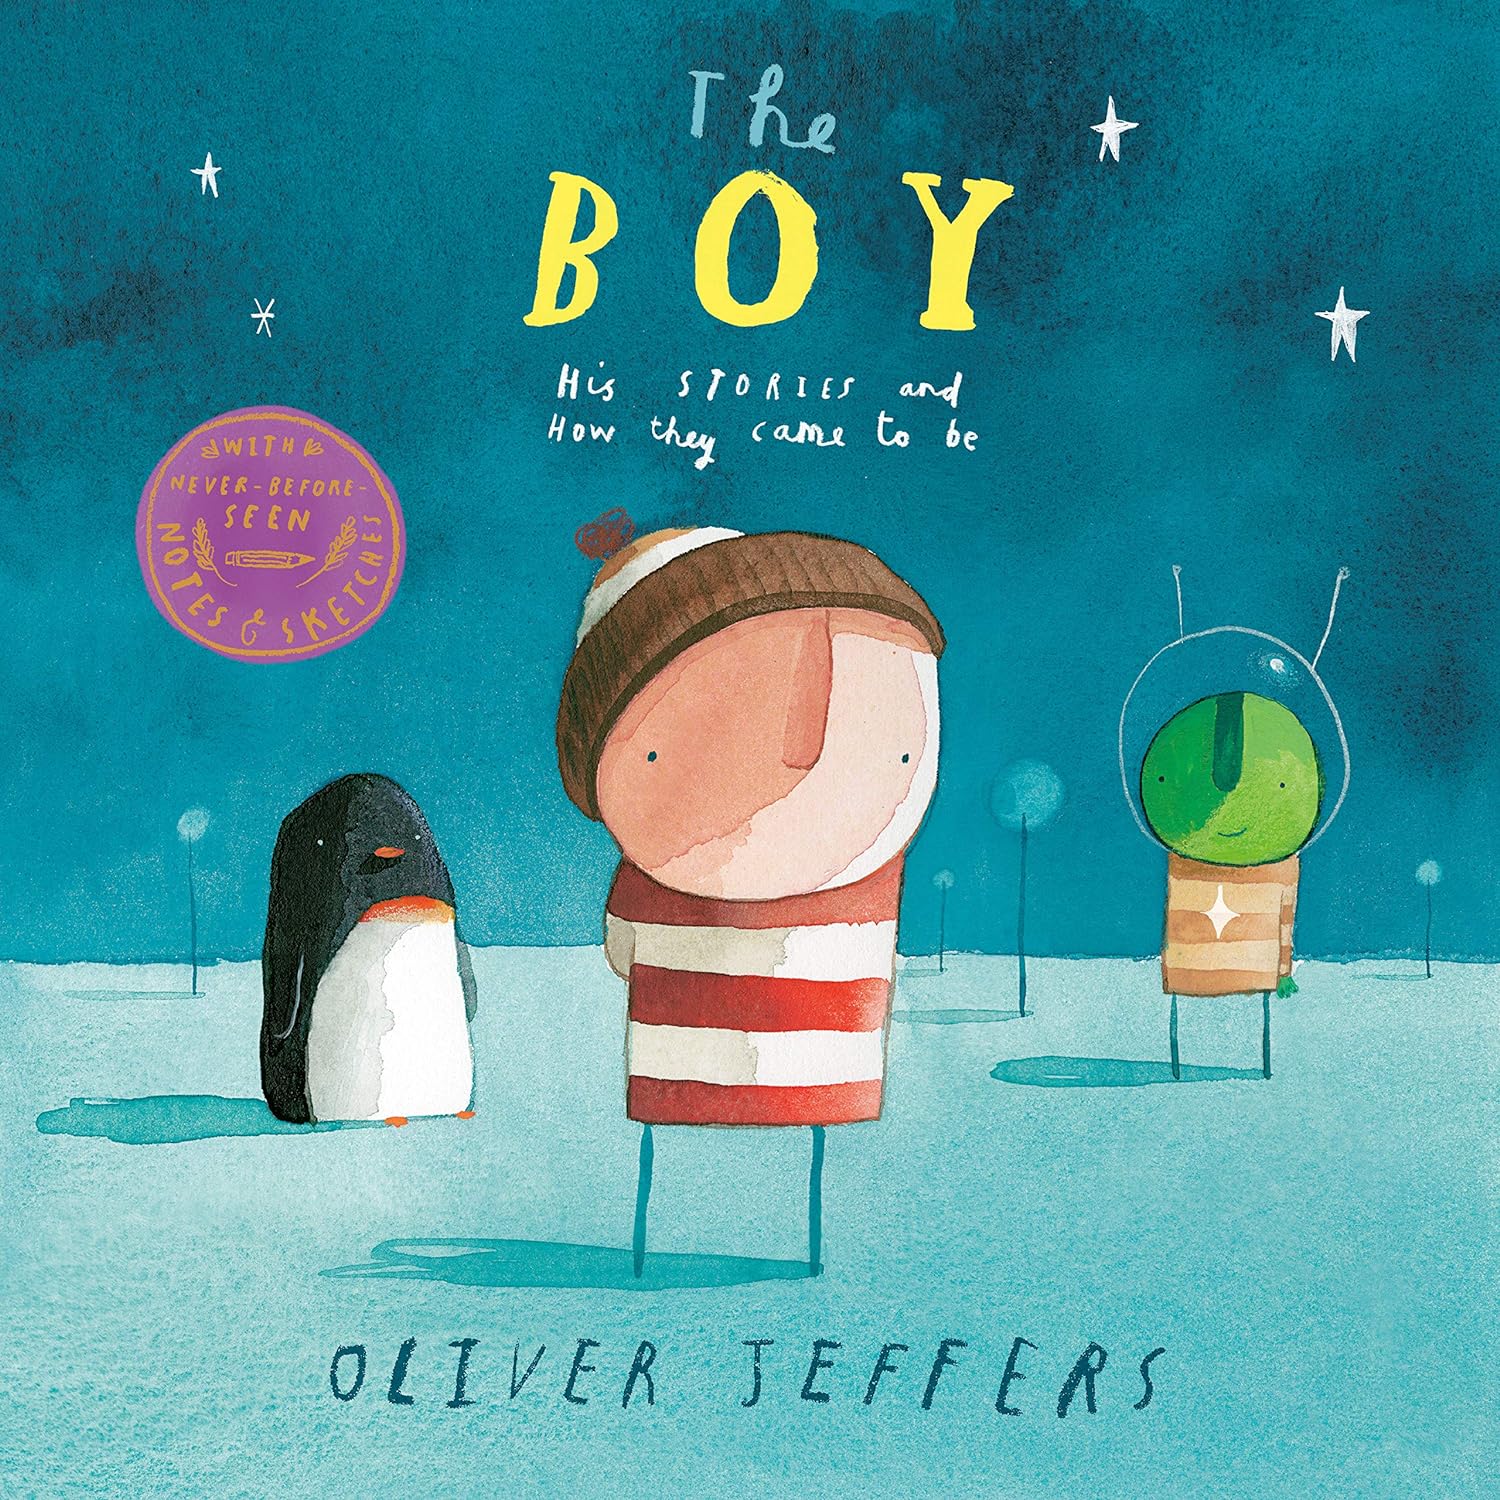 The Boy: His Stories and How They Came to Be by Oliver Jeffers